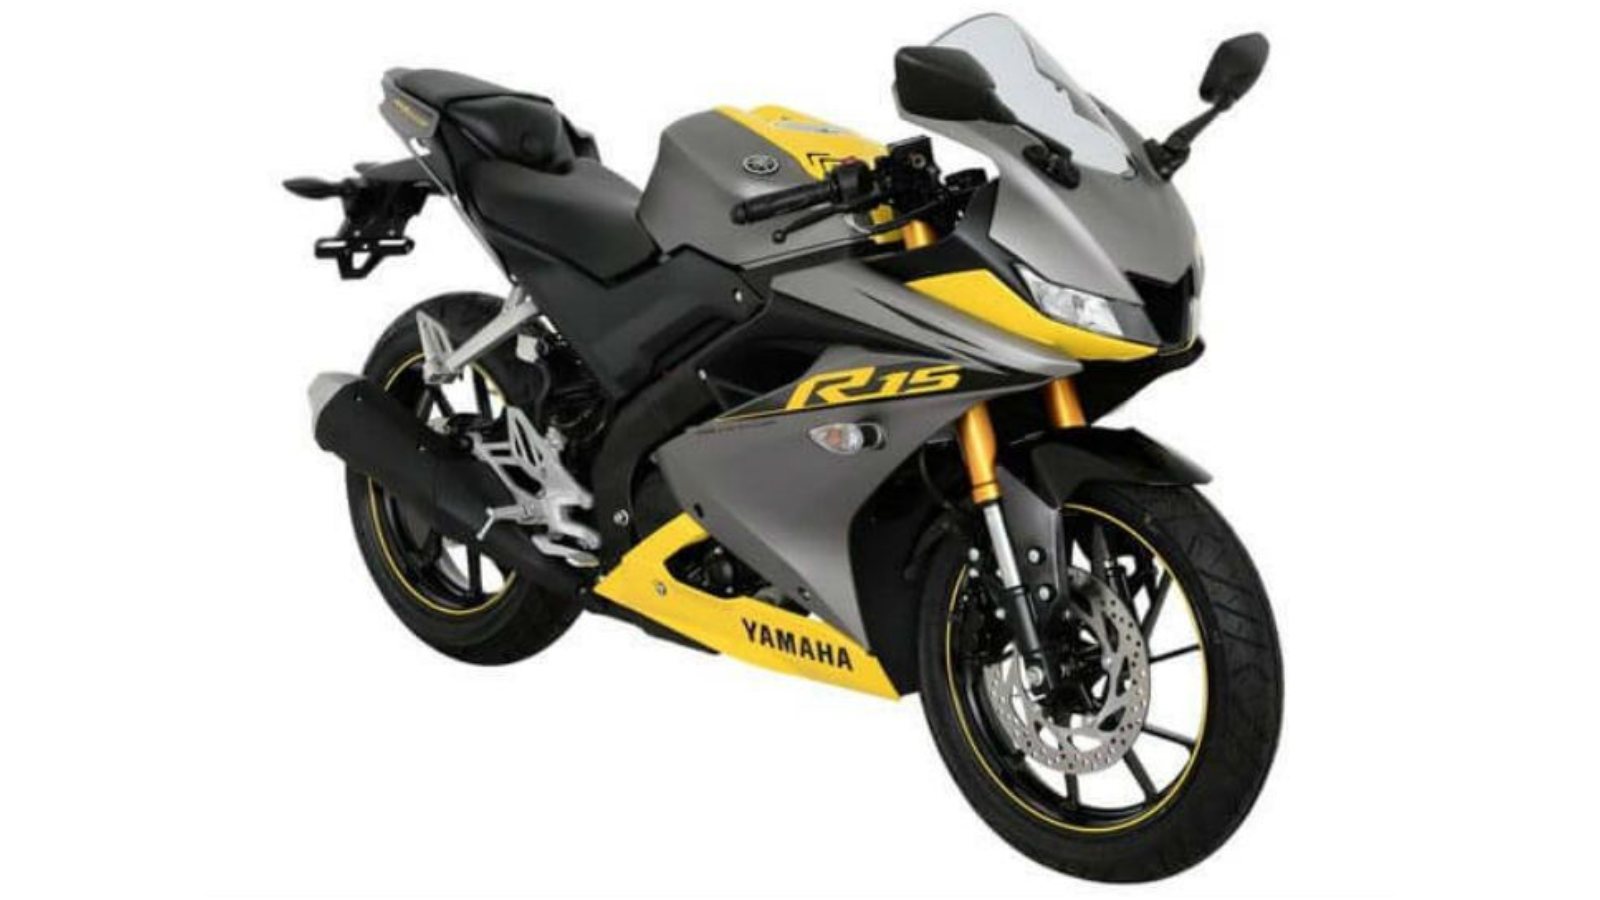 Yamaha Yzf R15 Price In India Specifications Images Motoroids